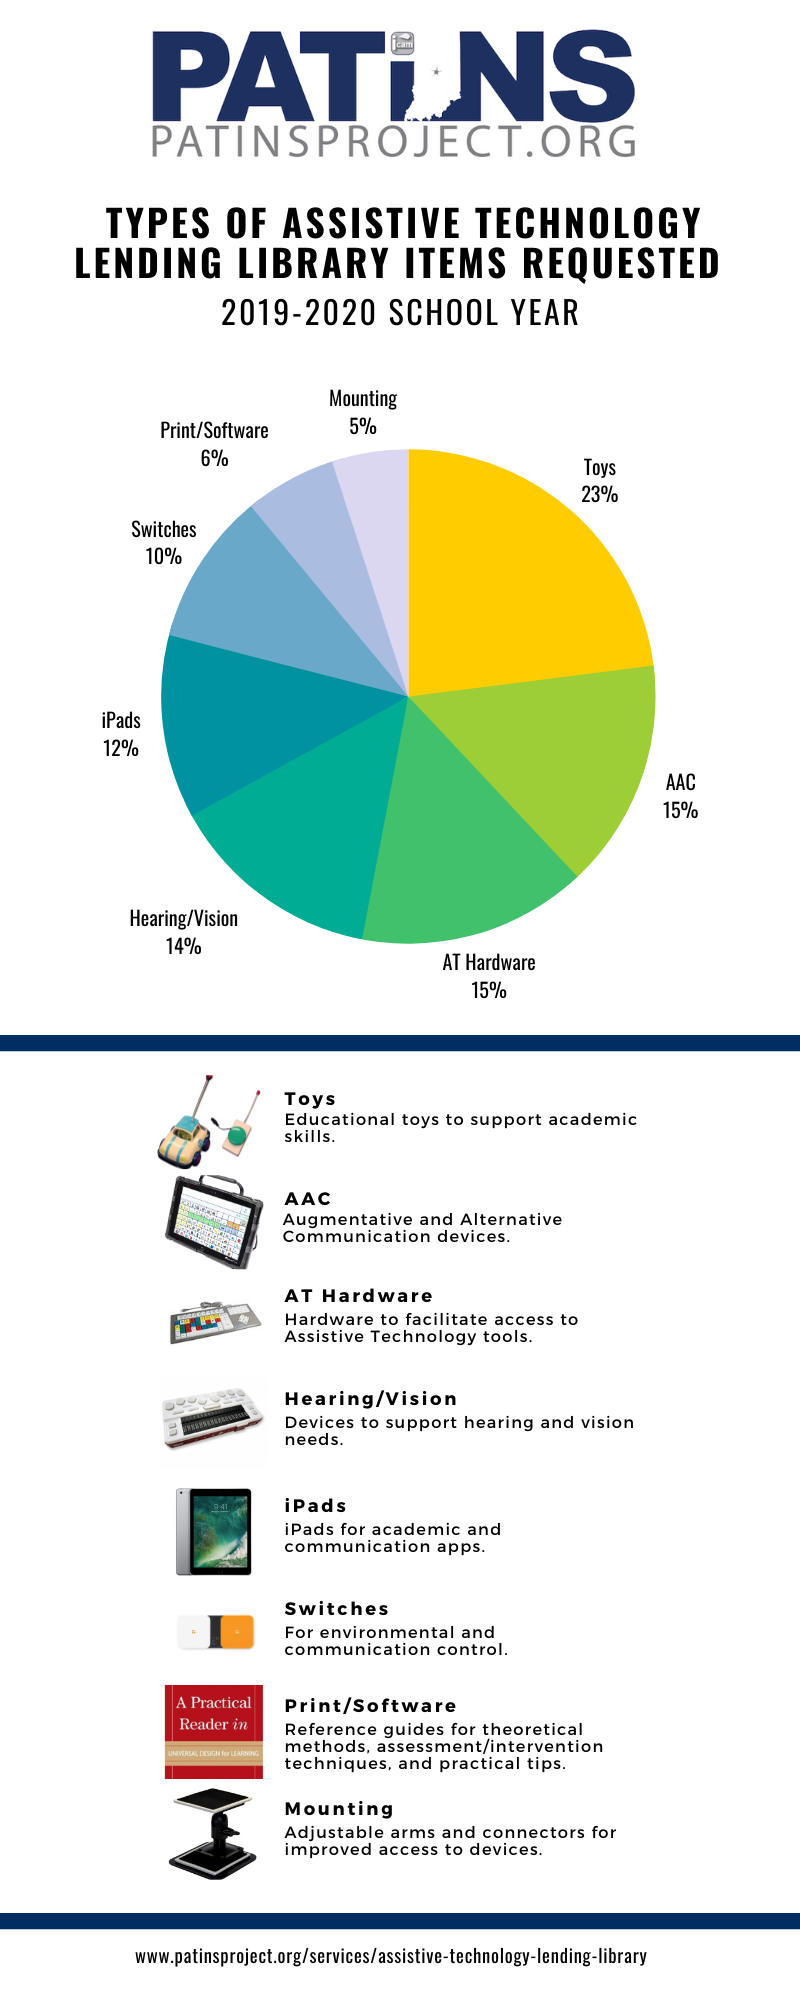 Types of Assistive Technology Lending Library Items Requested 2019-2020 School Year Infographic.